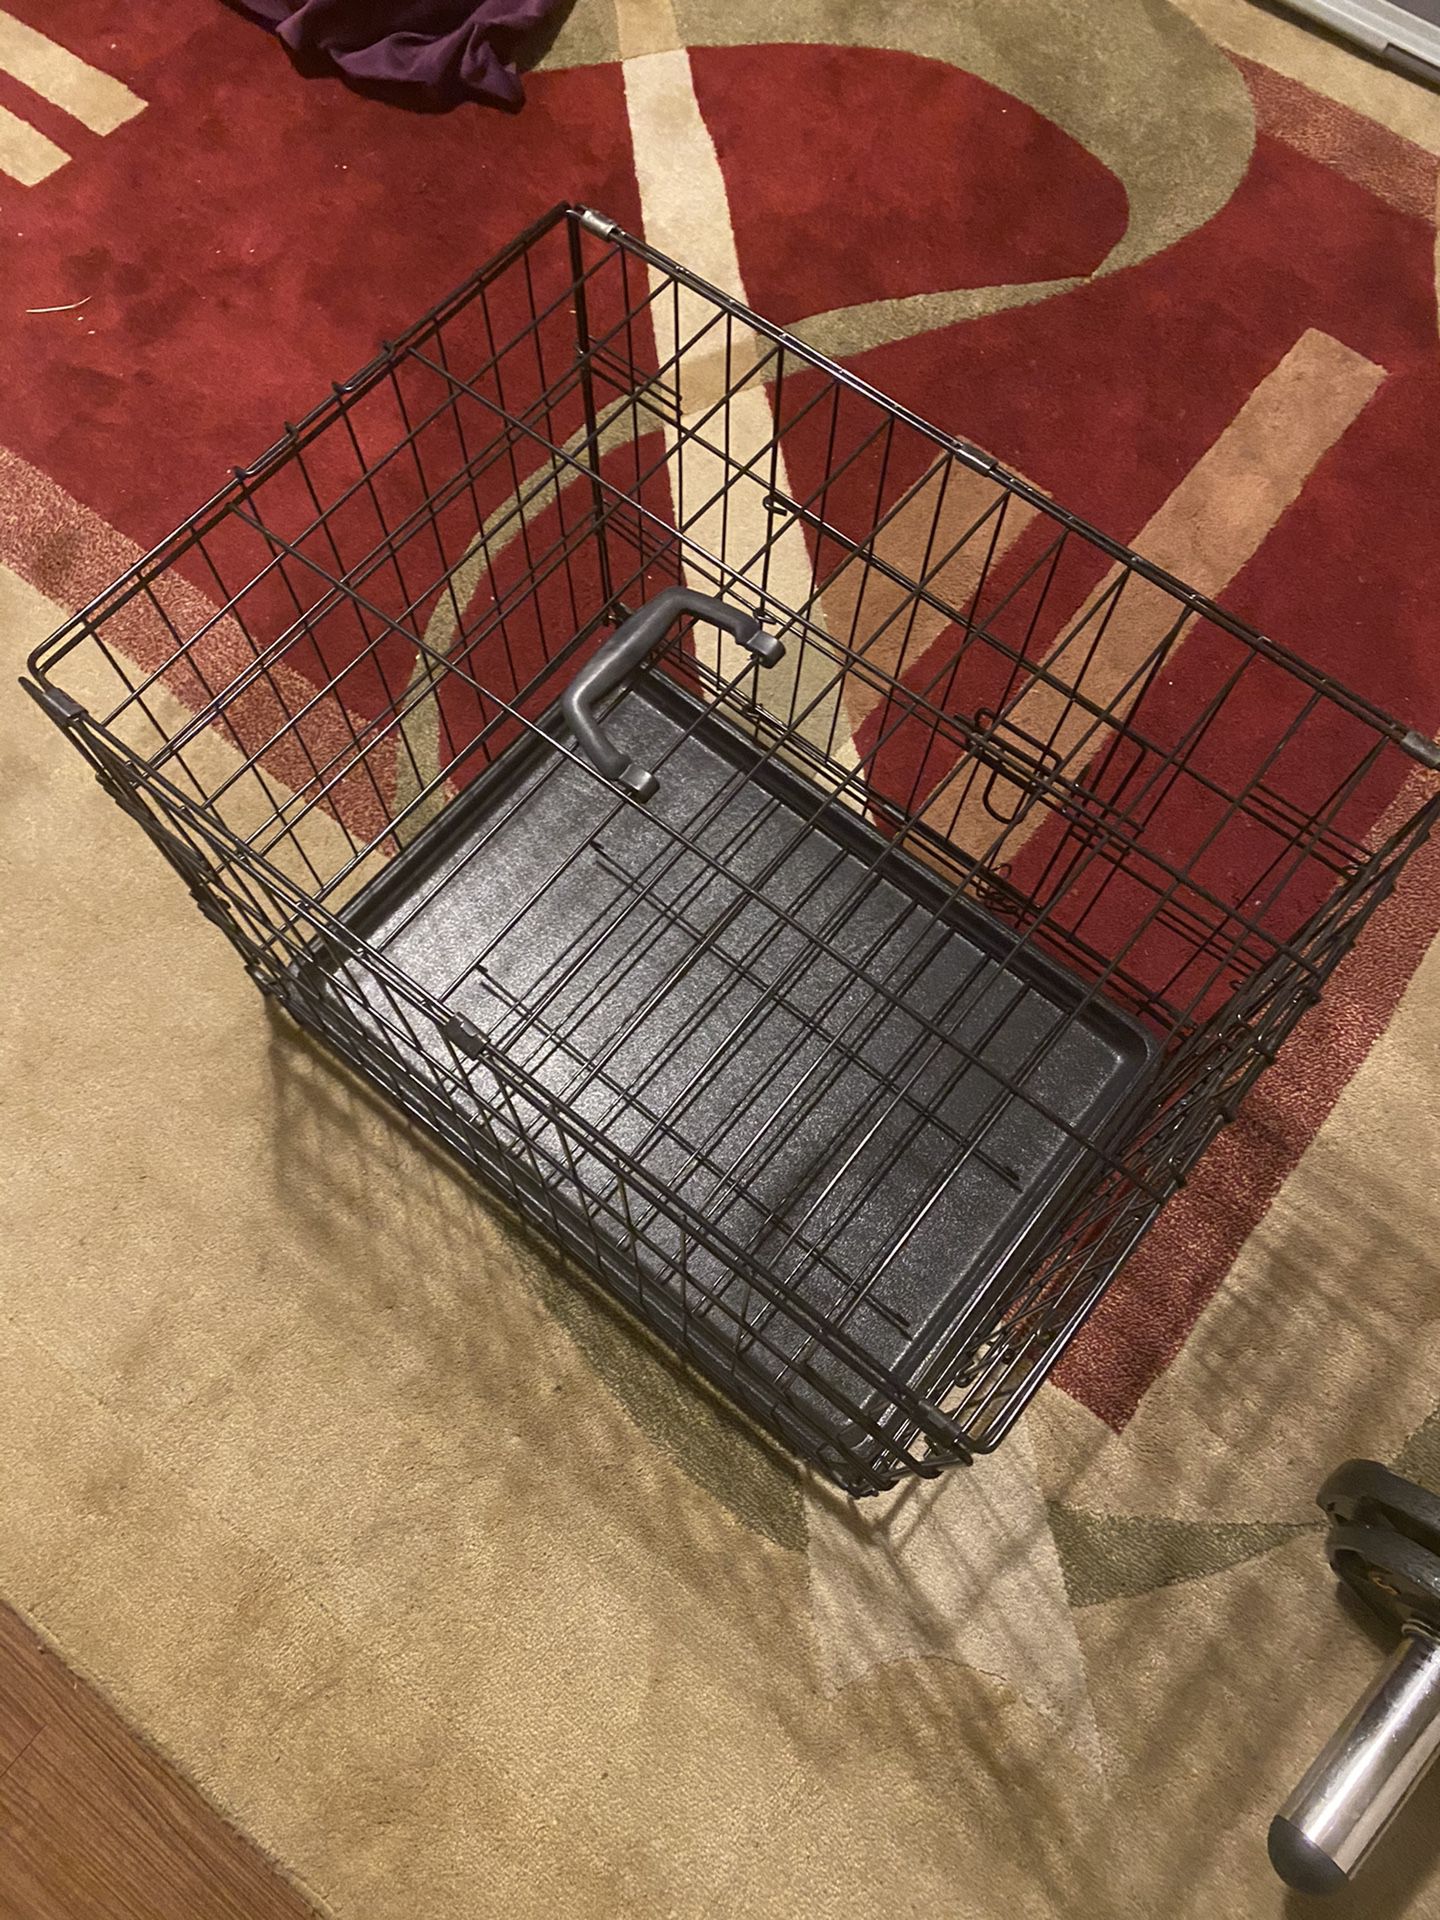 22x15x18 small/med dog crate